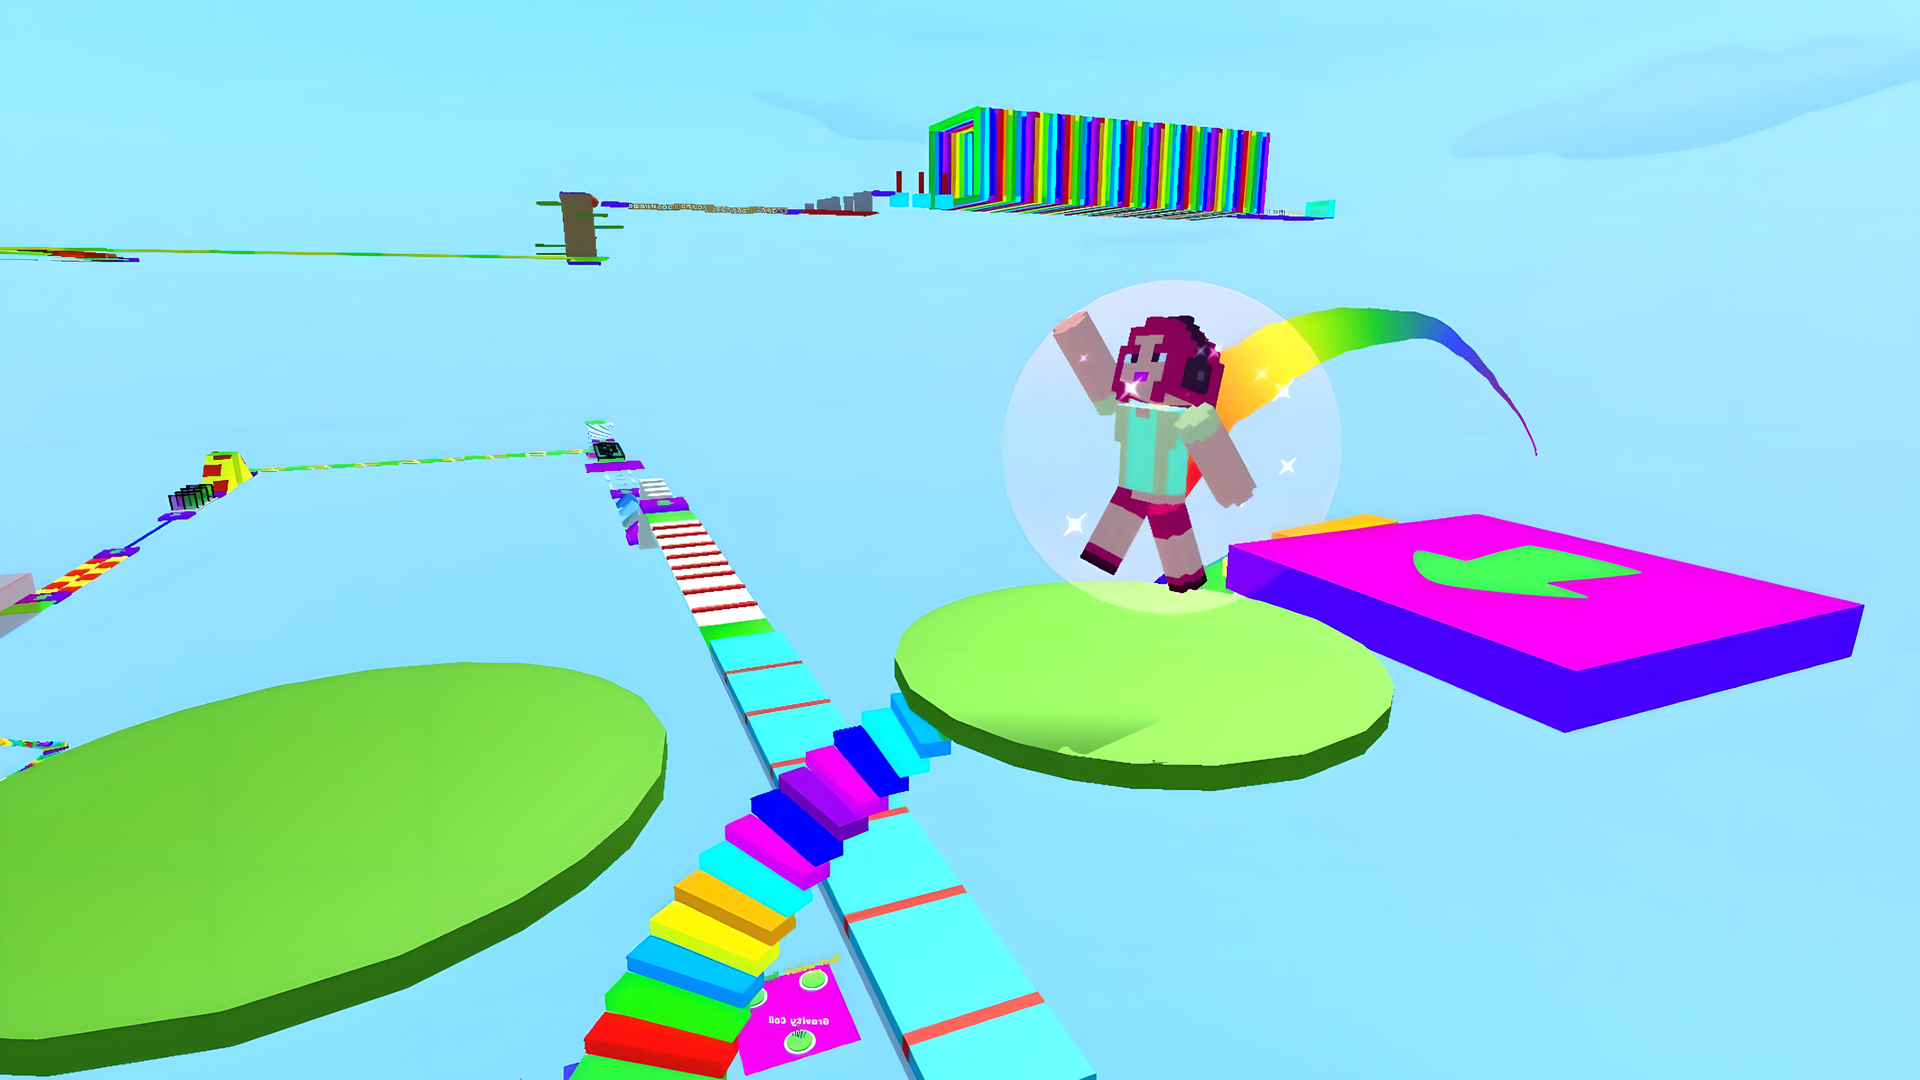 Parkour for roblox - Apps on Google Play